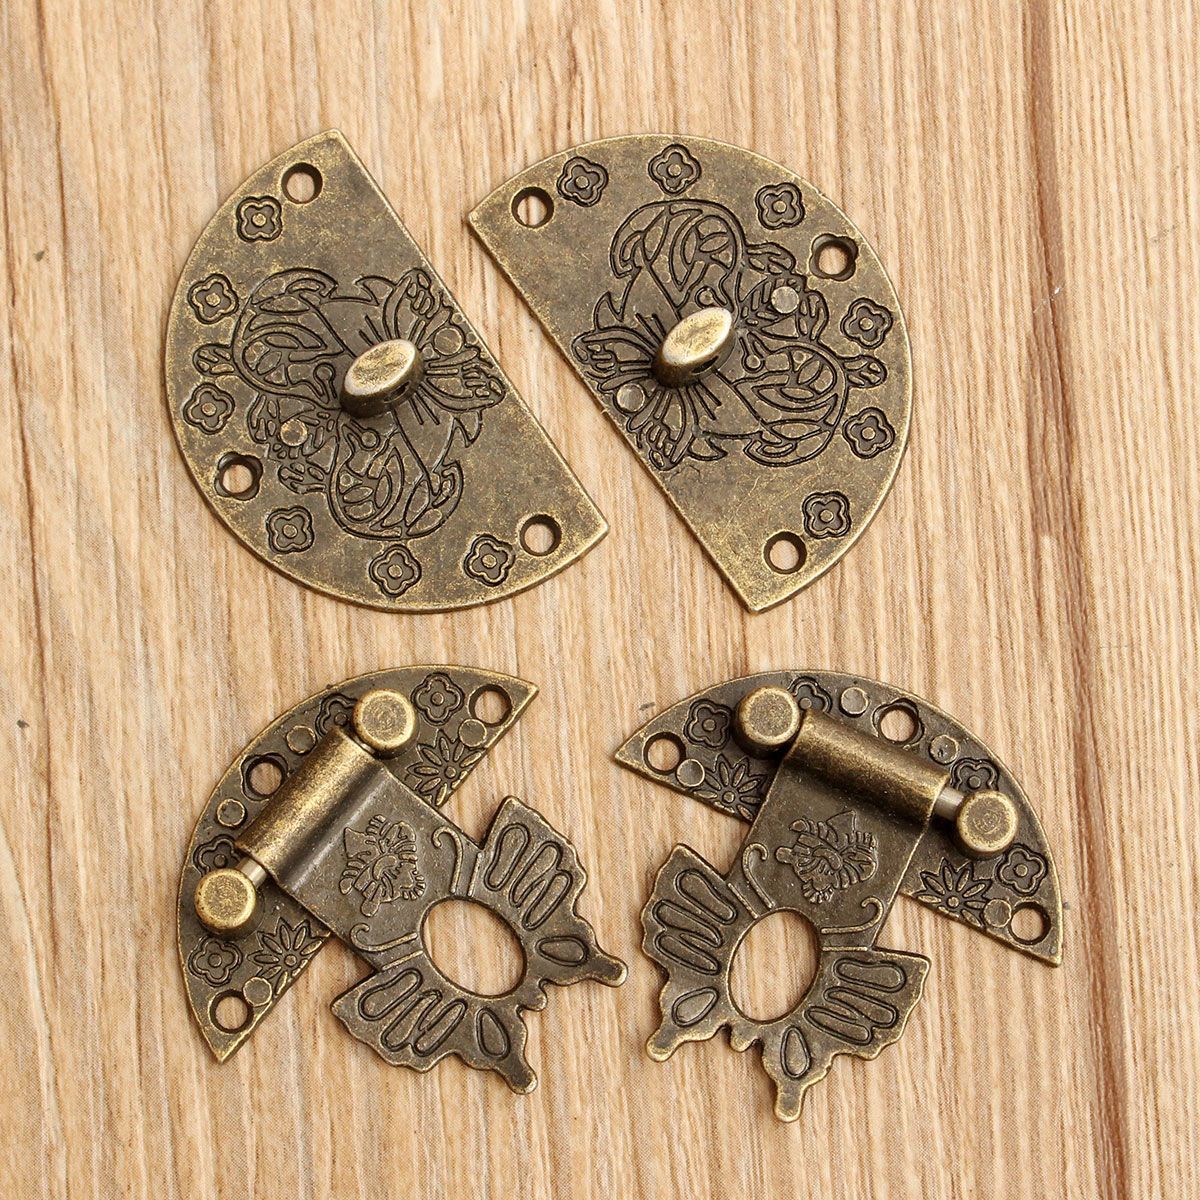 Jewelry-Wooden-Box-Lock-Buckle-Decorative-Hardware-Butterfly-Clasp-Antique-Bronze-1427531